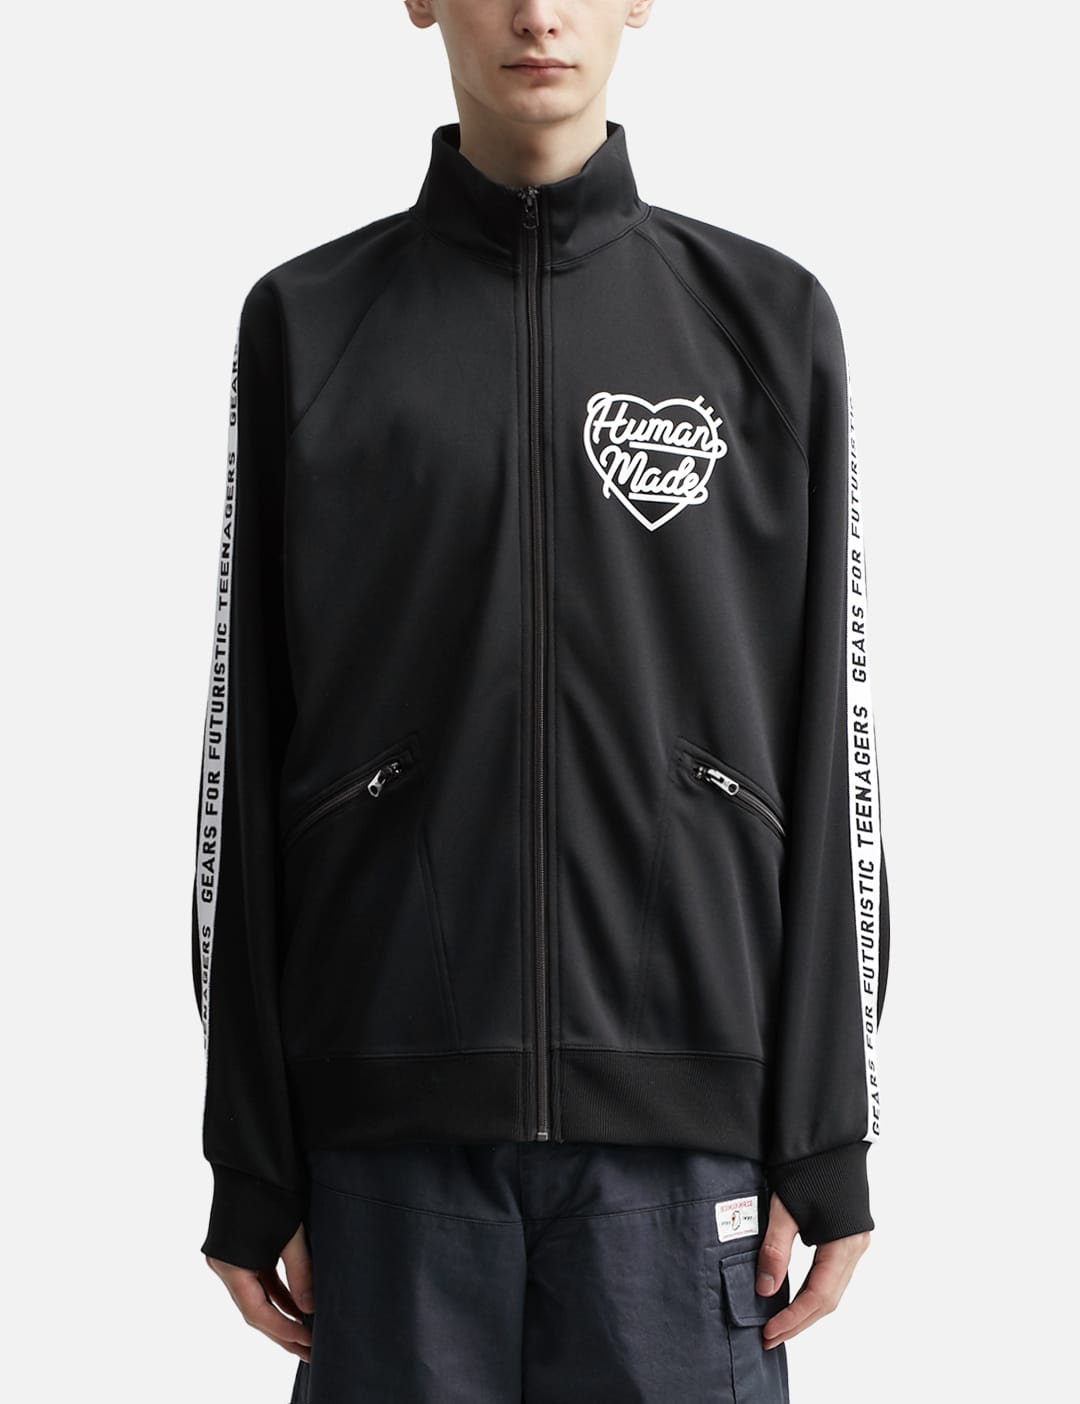 Human Made   TRACK JACKET   HBX   Globally Curated Fashion and